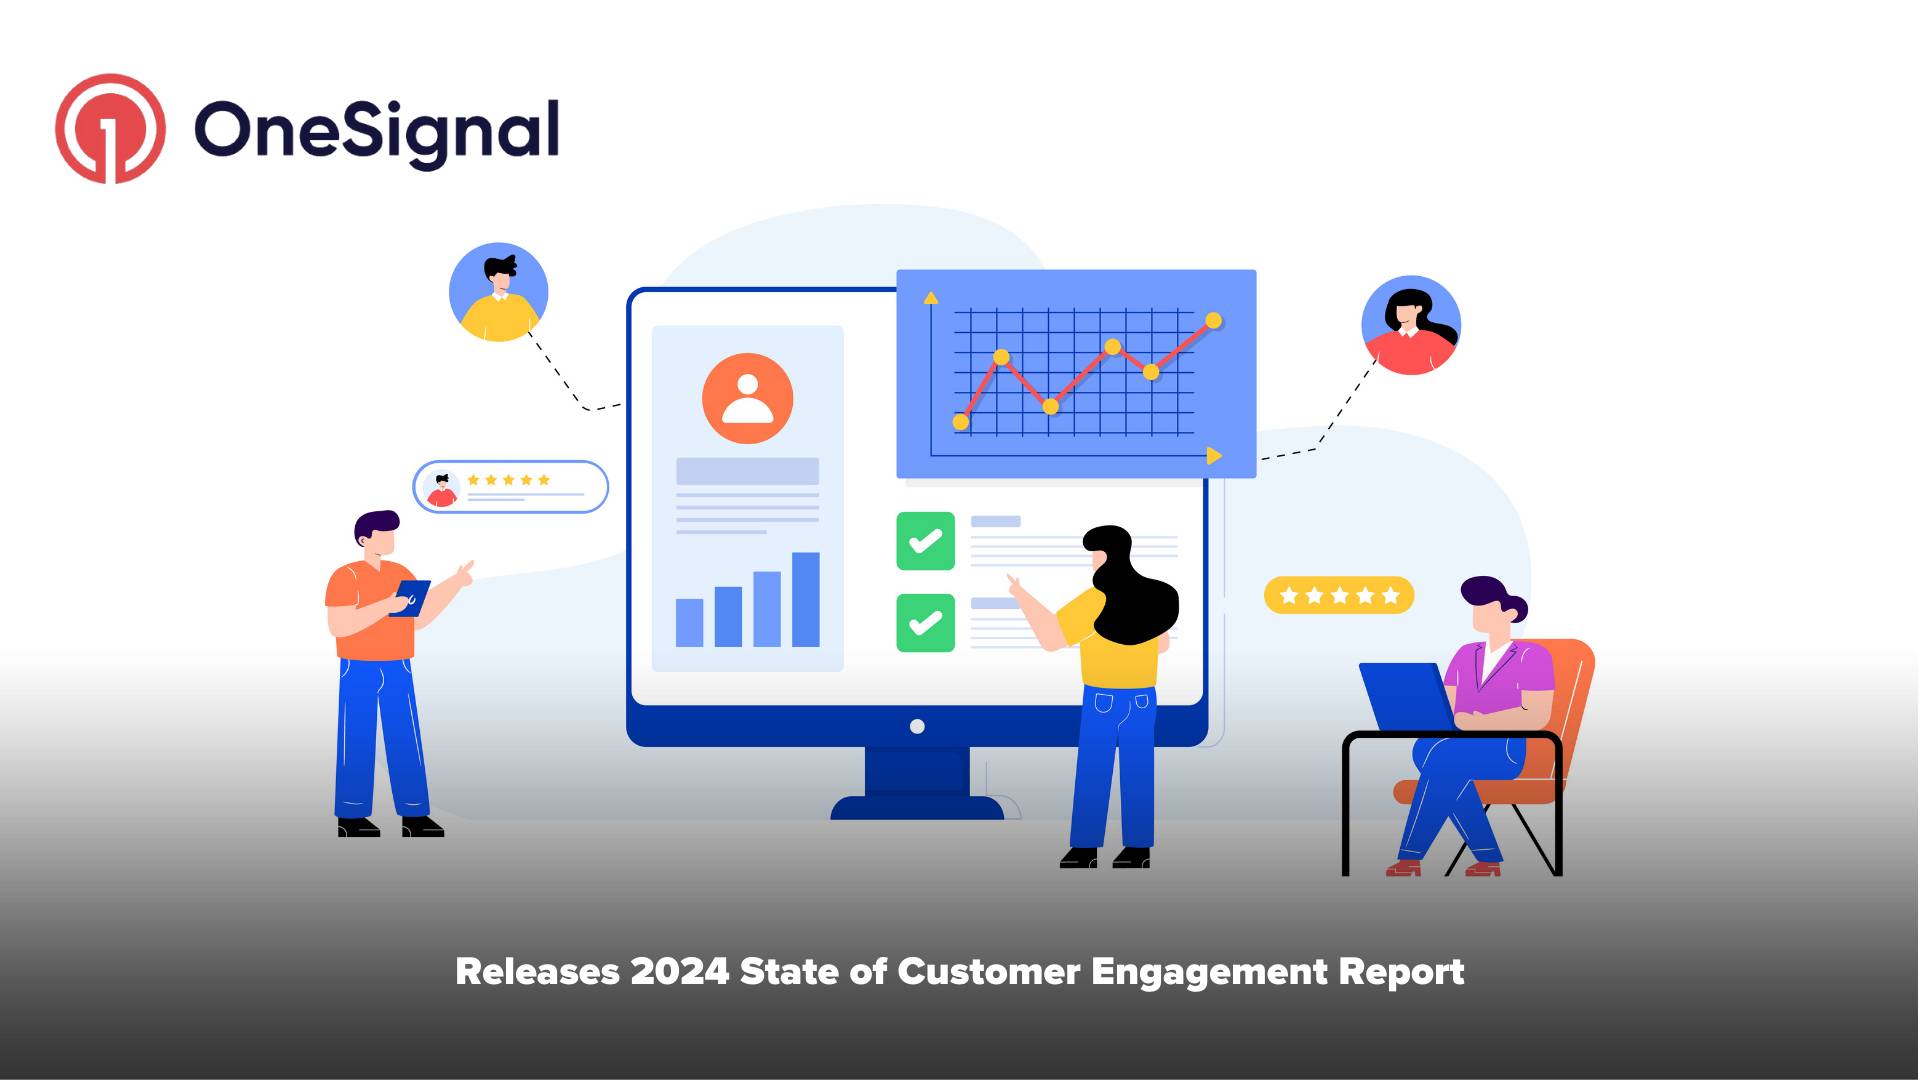 OneSignal Releases 2024 State of Customer Engagement Report Revealing Key Omnichannel Considerations and Opportunities